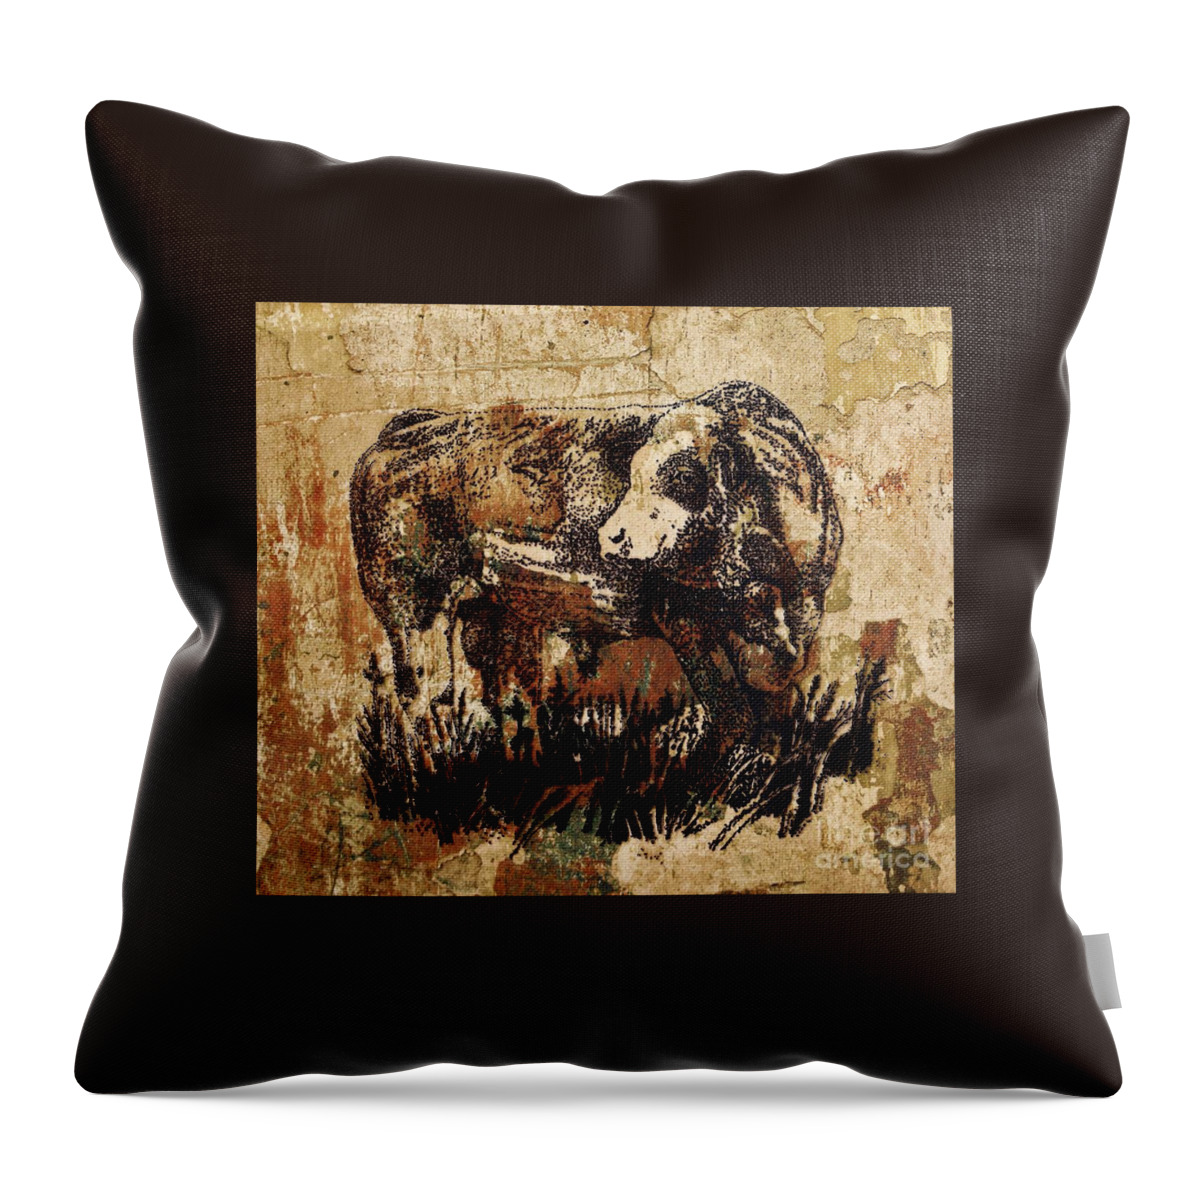 Simmental Bull Throw Pillow featuring the drawing German Fleckvieh Bull 21 by Larry Campbell